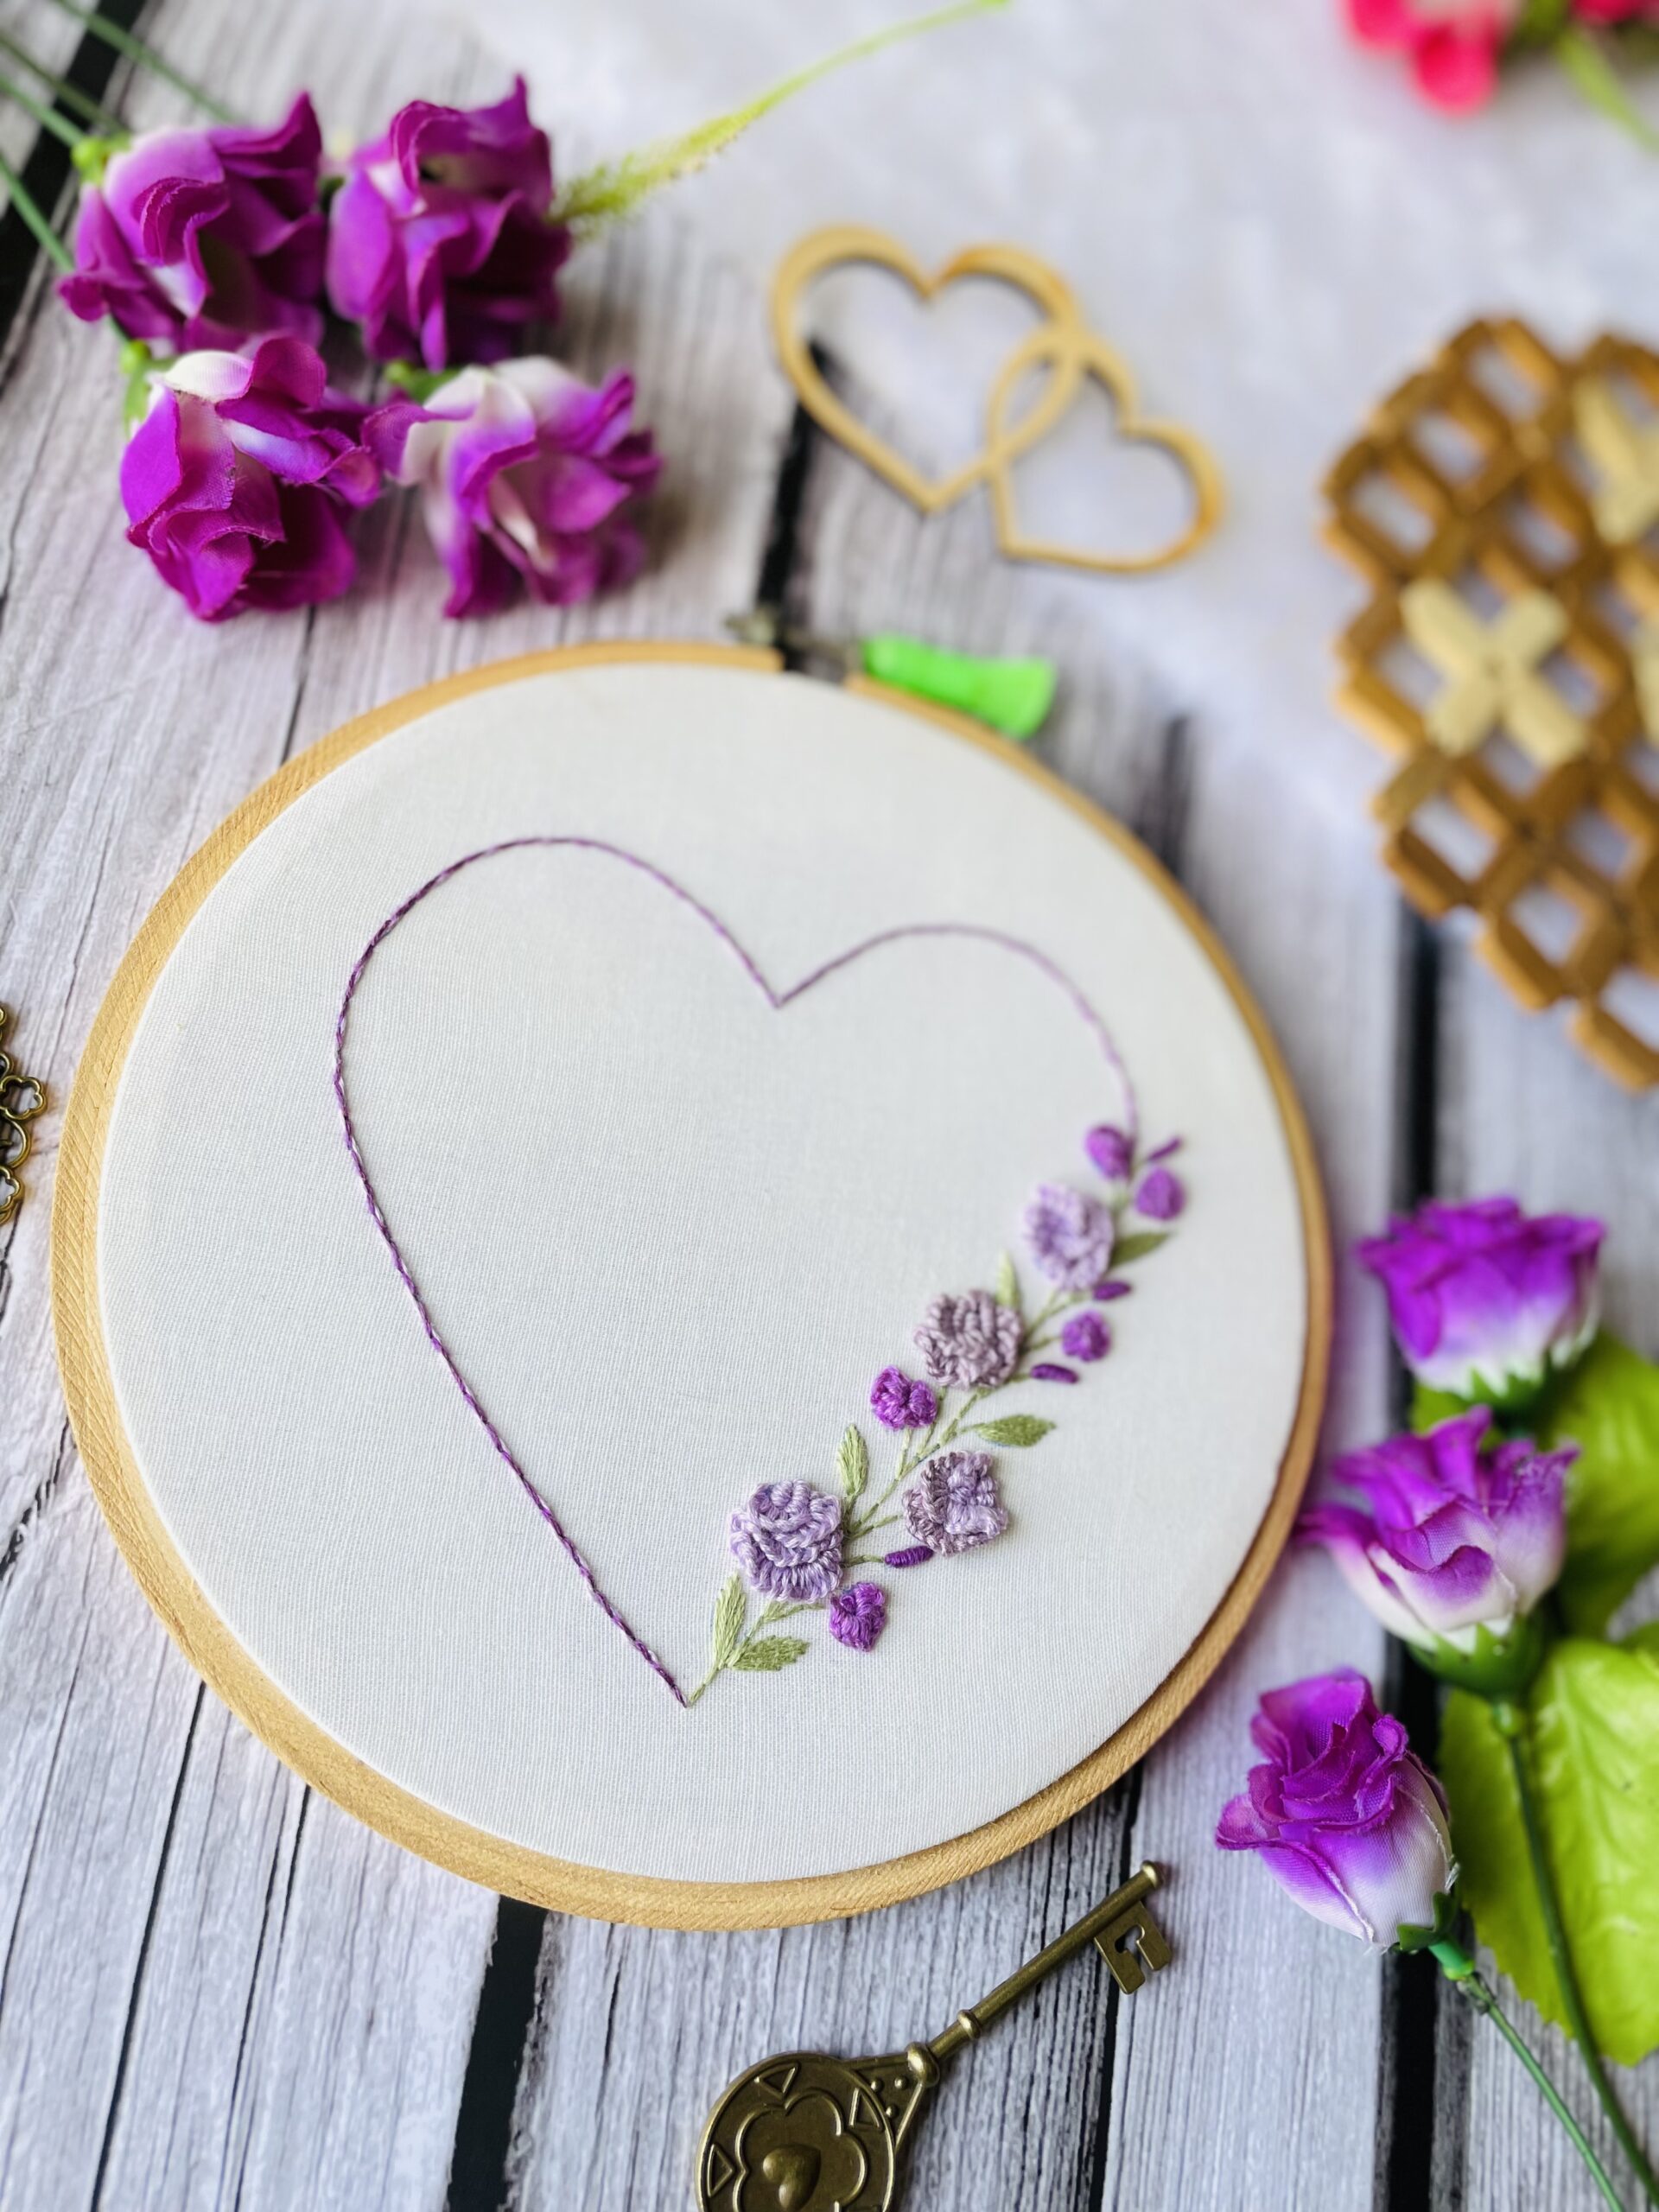 Floral Heart shape Embroidery design - Scoop My Art